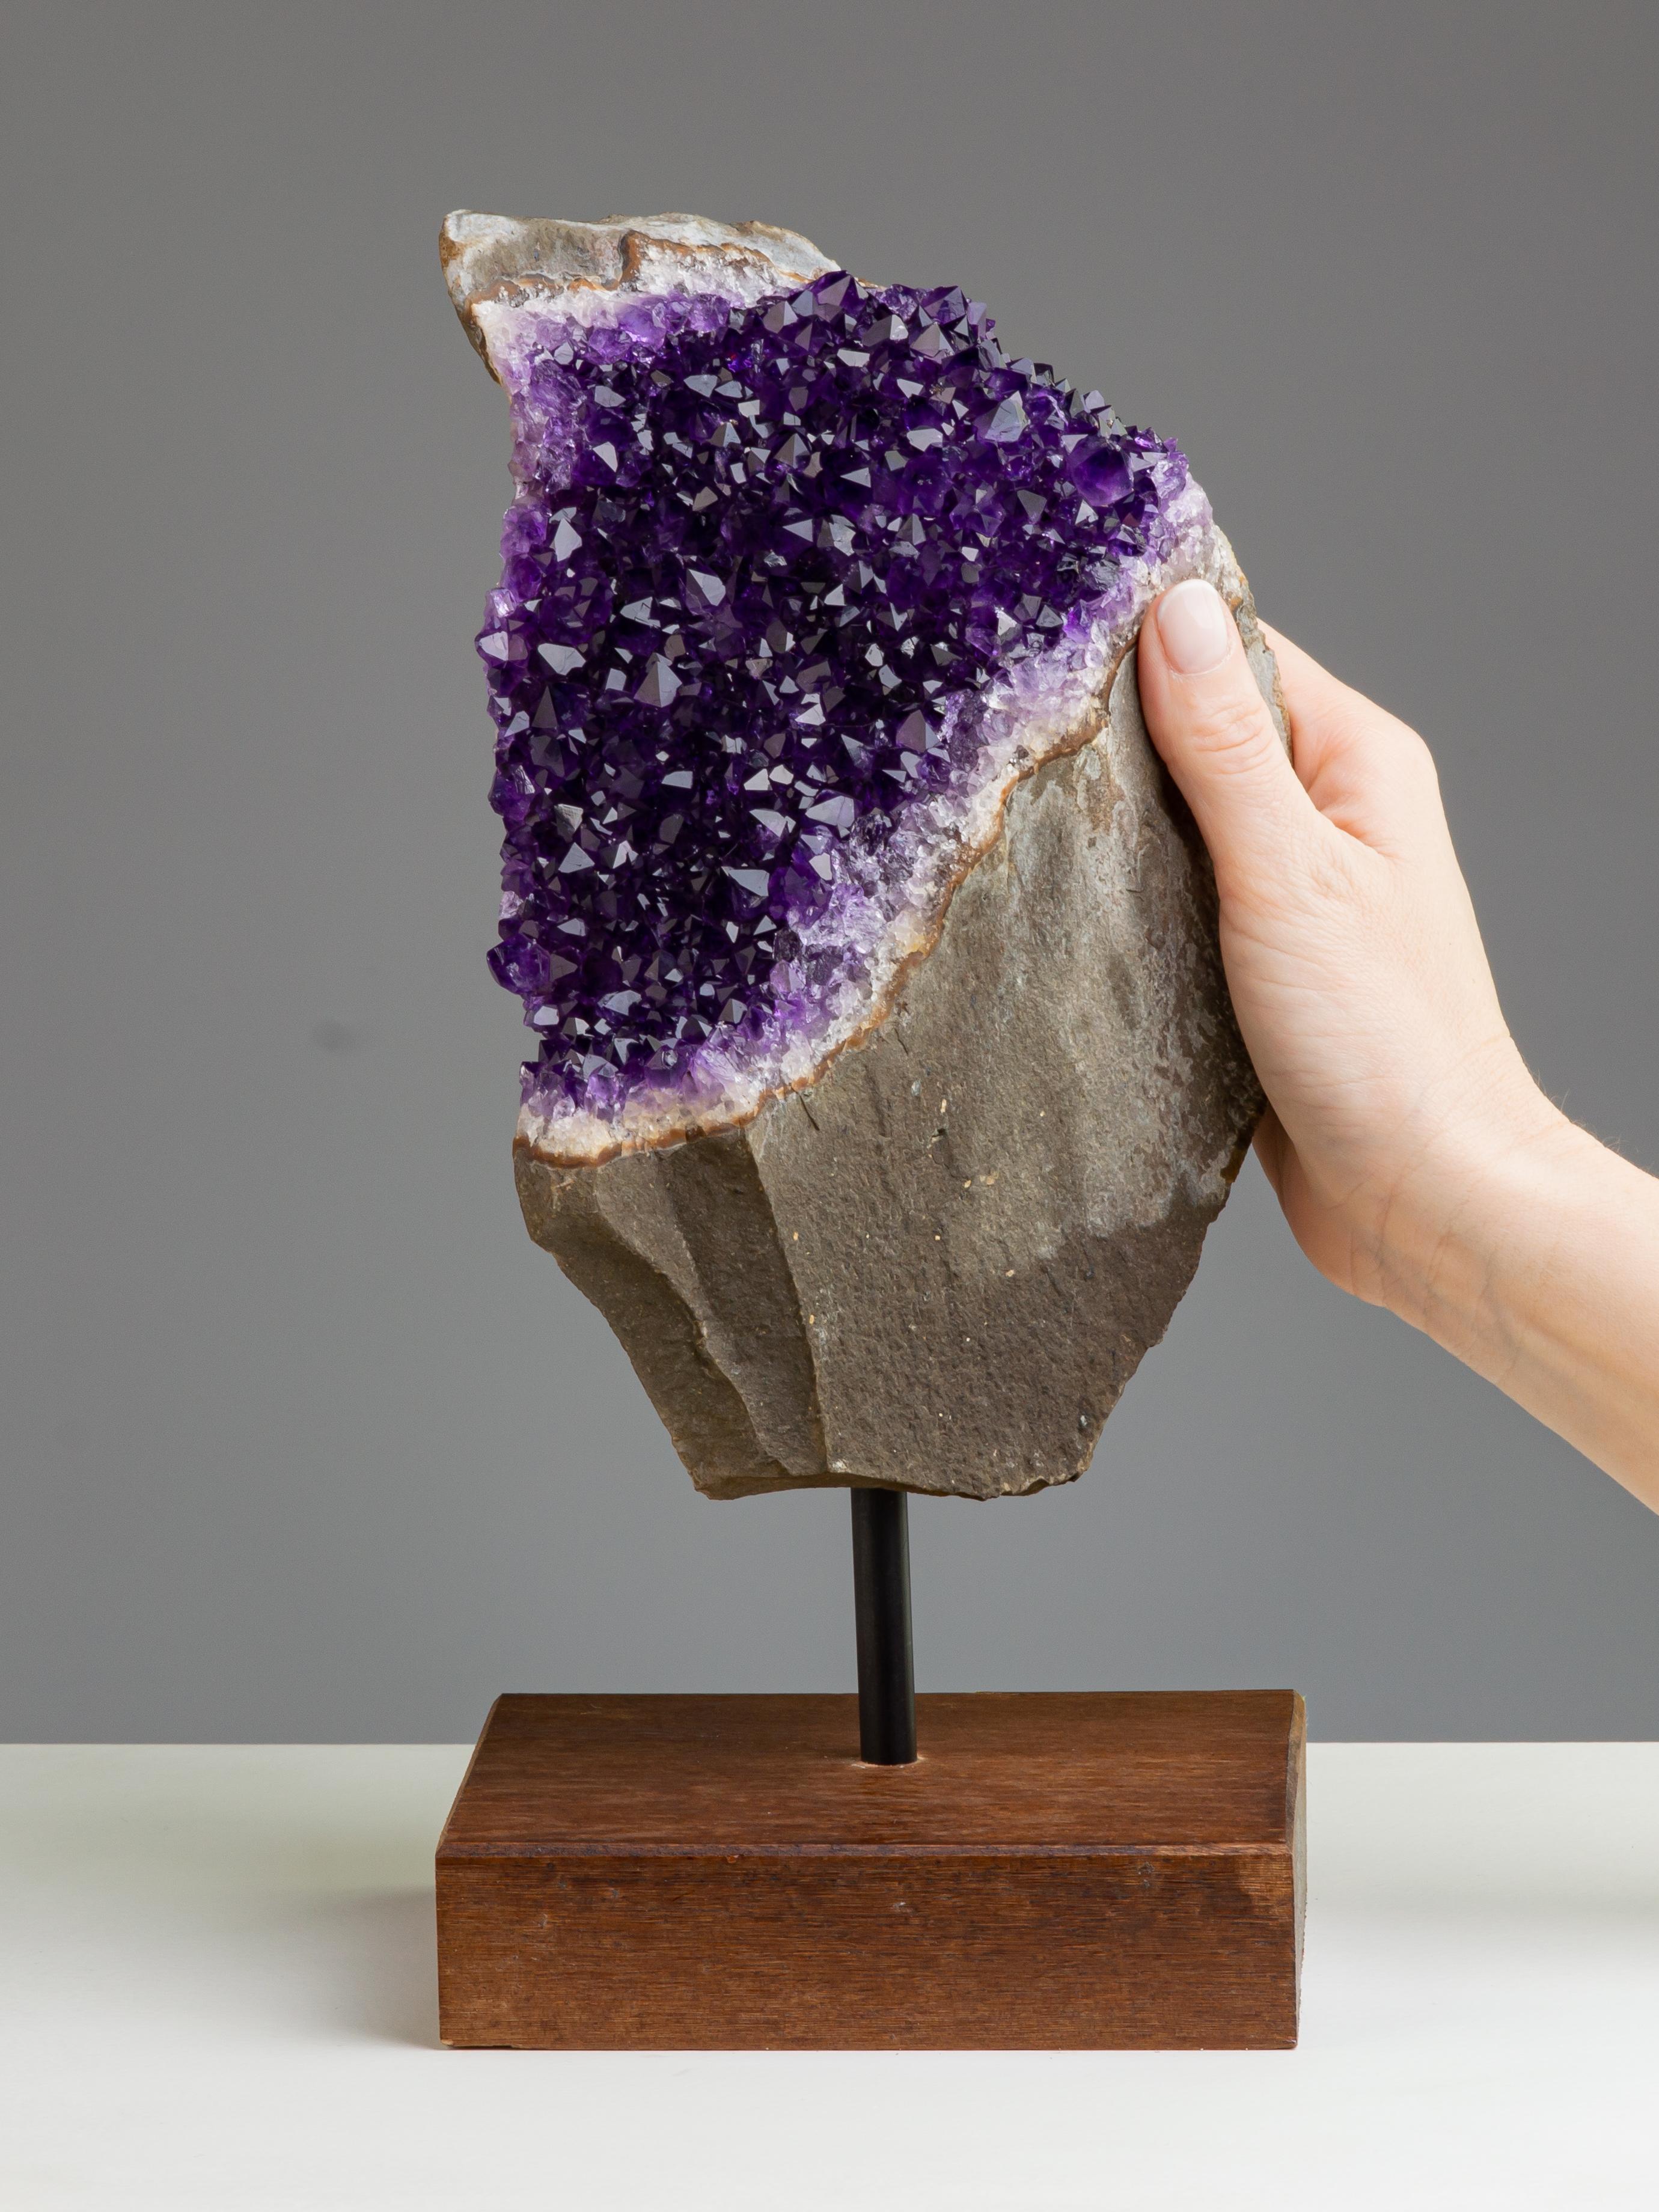 This fascinating section of basalt perfectly illustrates how the precious
amethyst appears in the tunnels of the underground mines of Artigas.
Glistening deep purple crystals jump out from the rough volcanic stone,
signaling that the area is rich